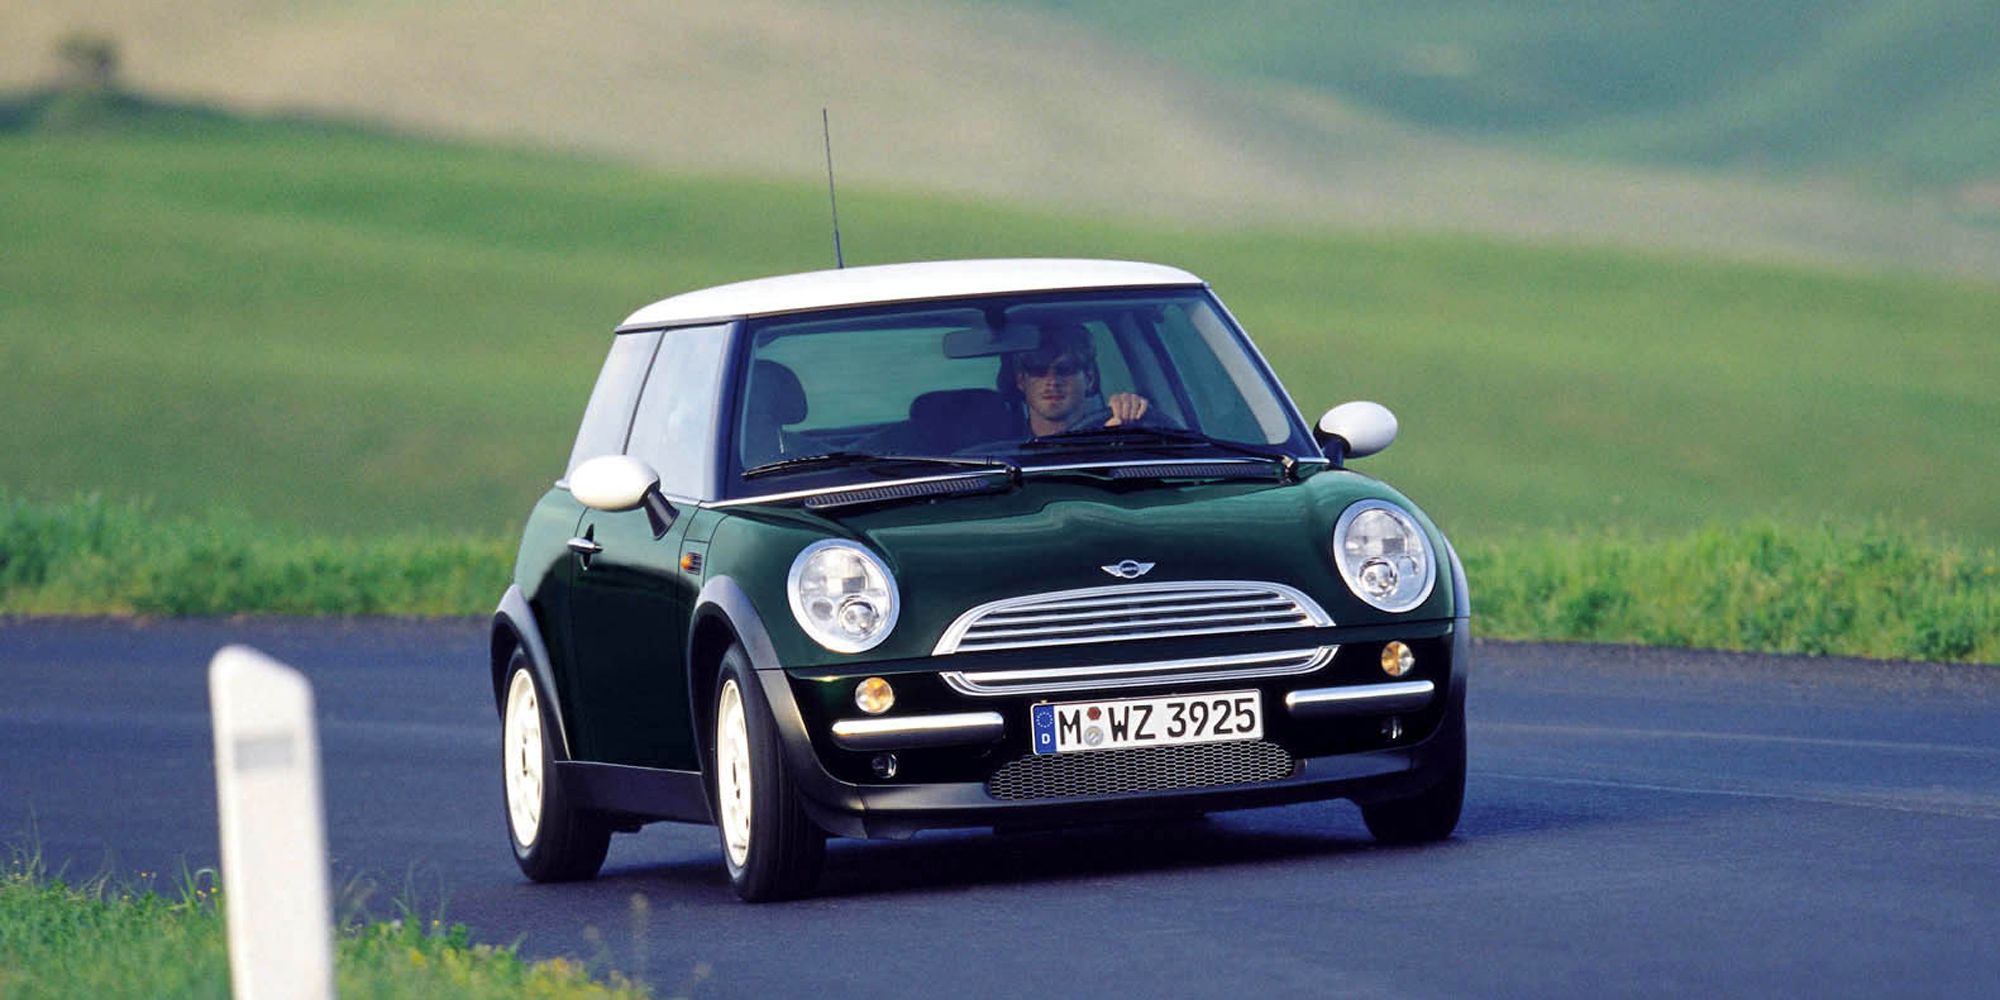 The front of a dark green Mini Hatch on the move